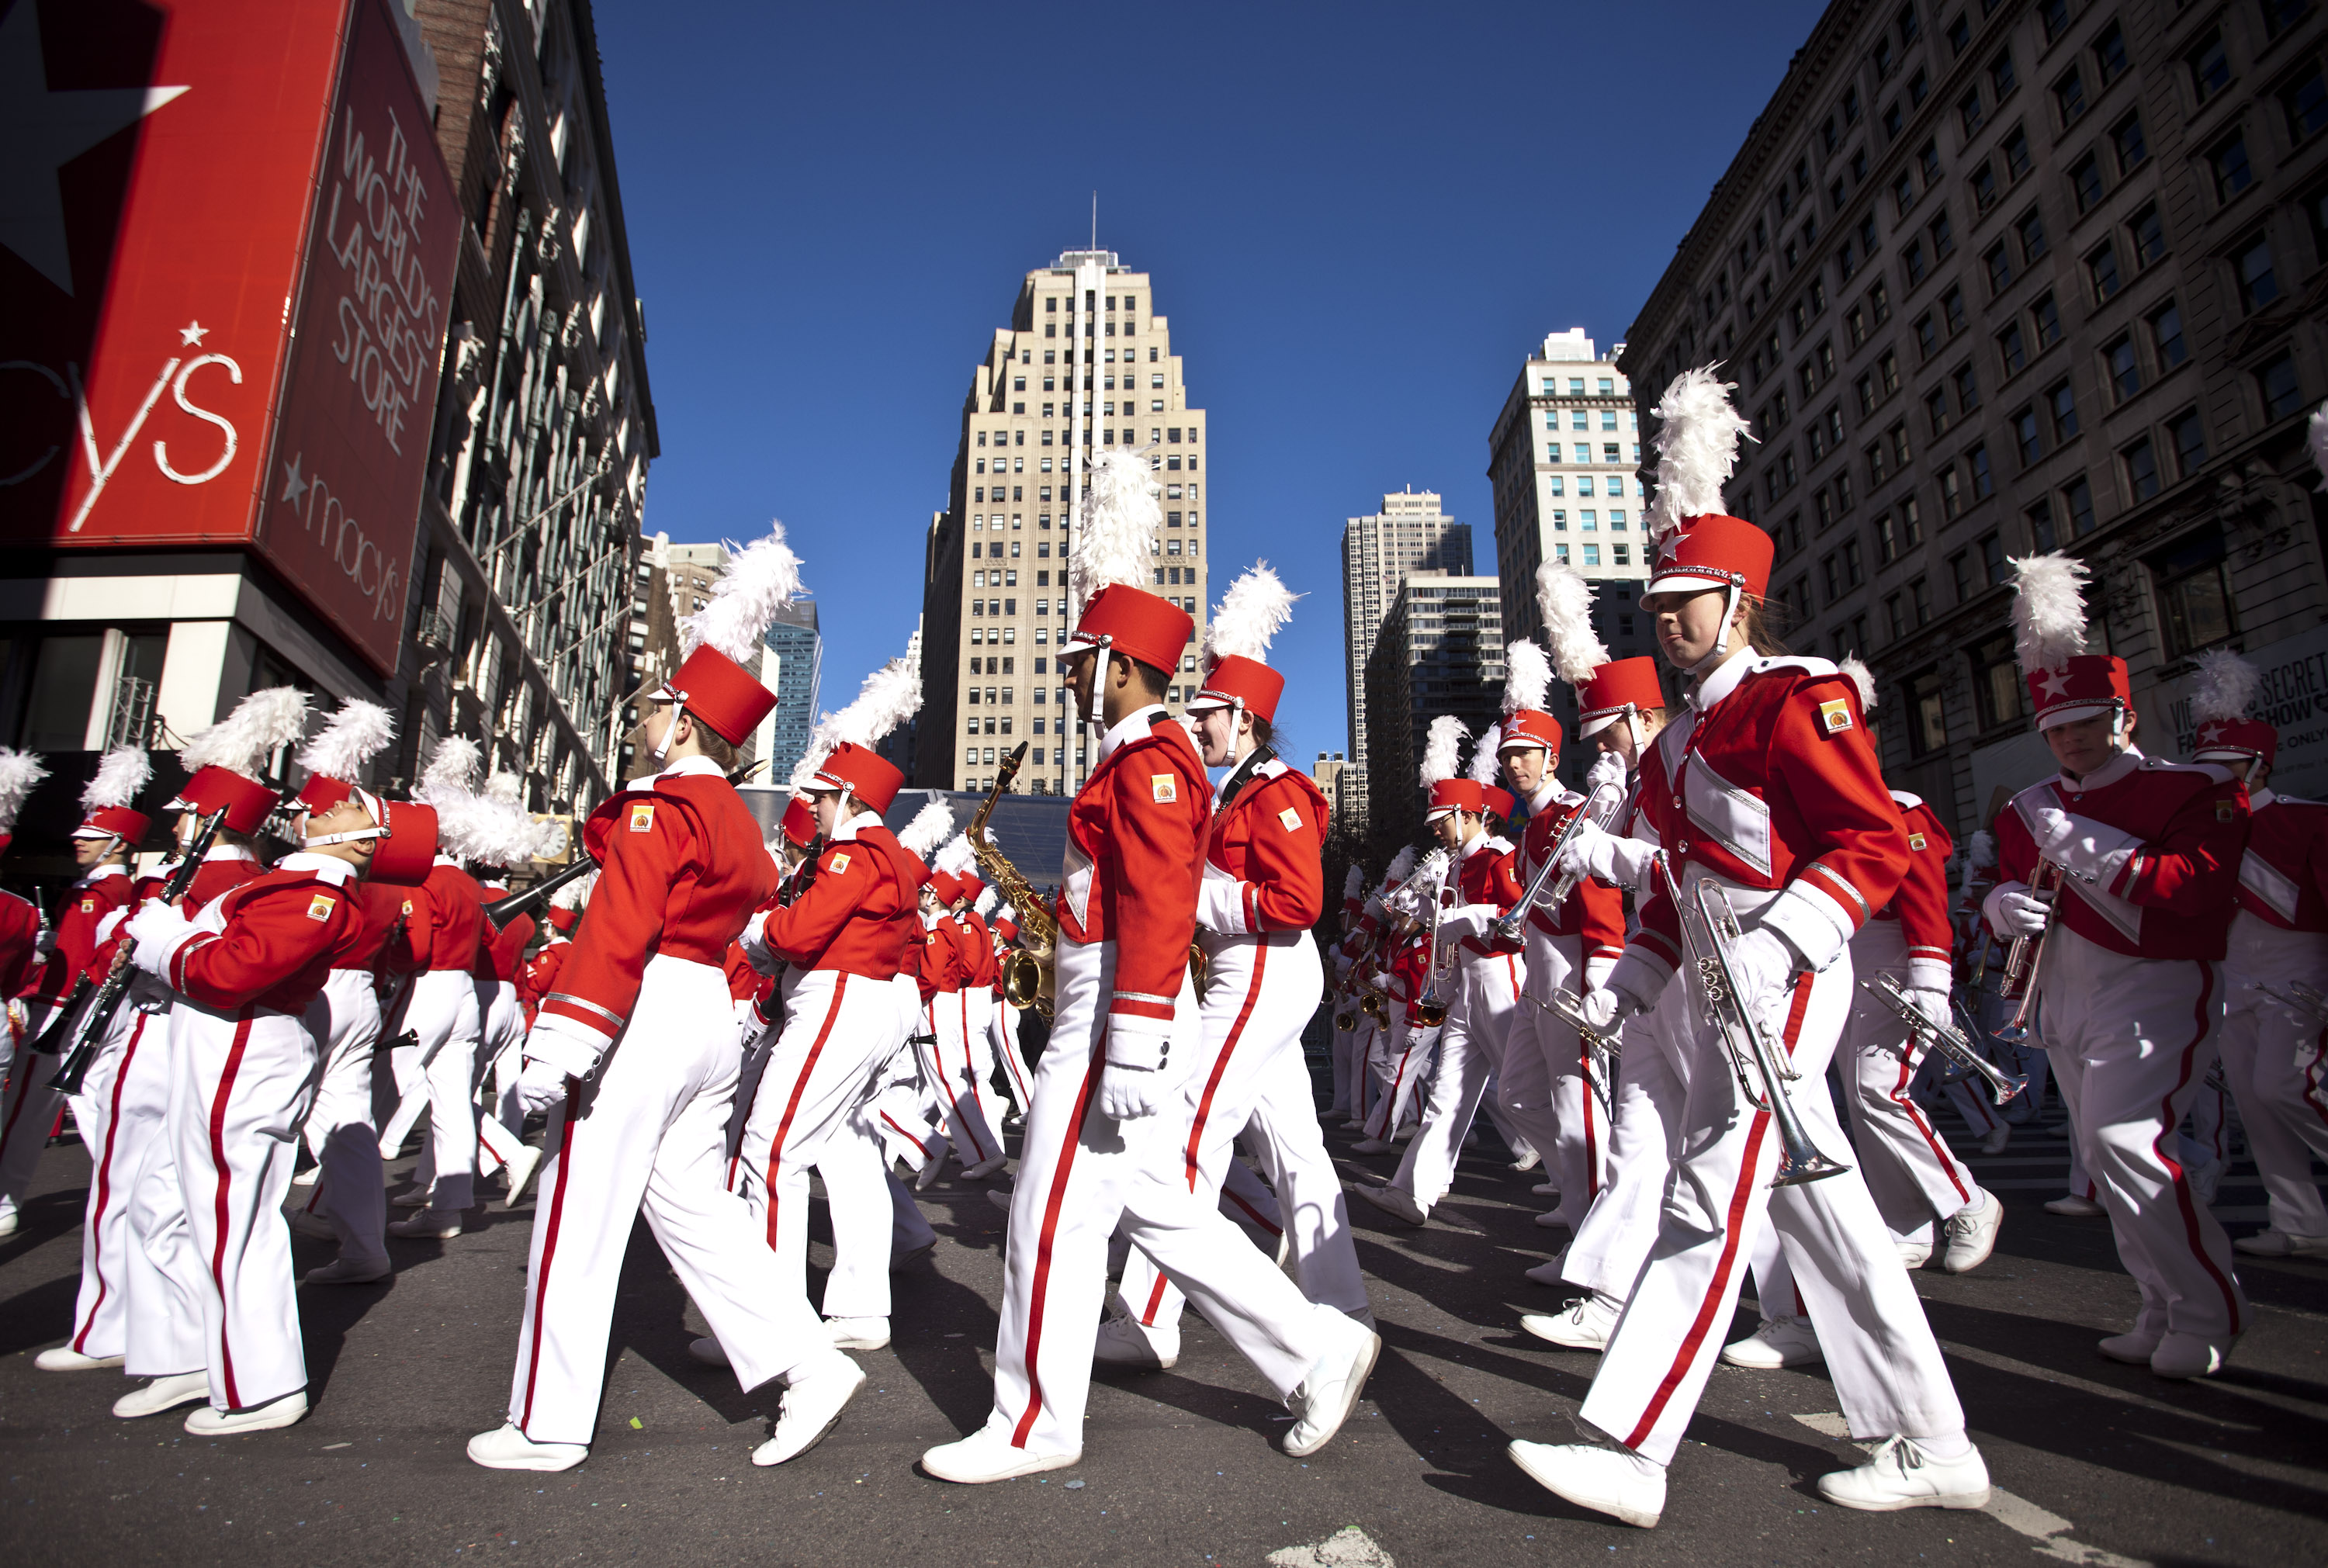 Macy’s Thanksgiving Day Parade 10 Facts You Need to Know